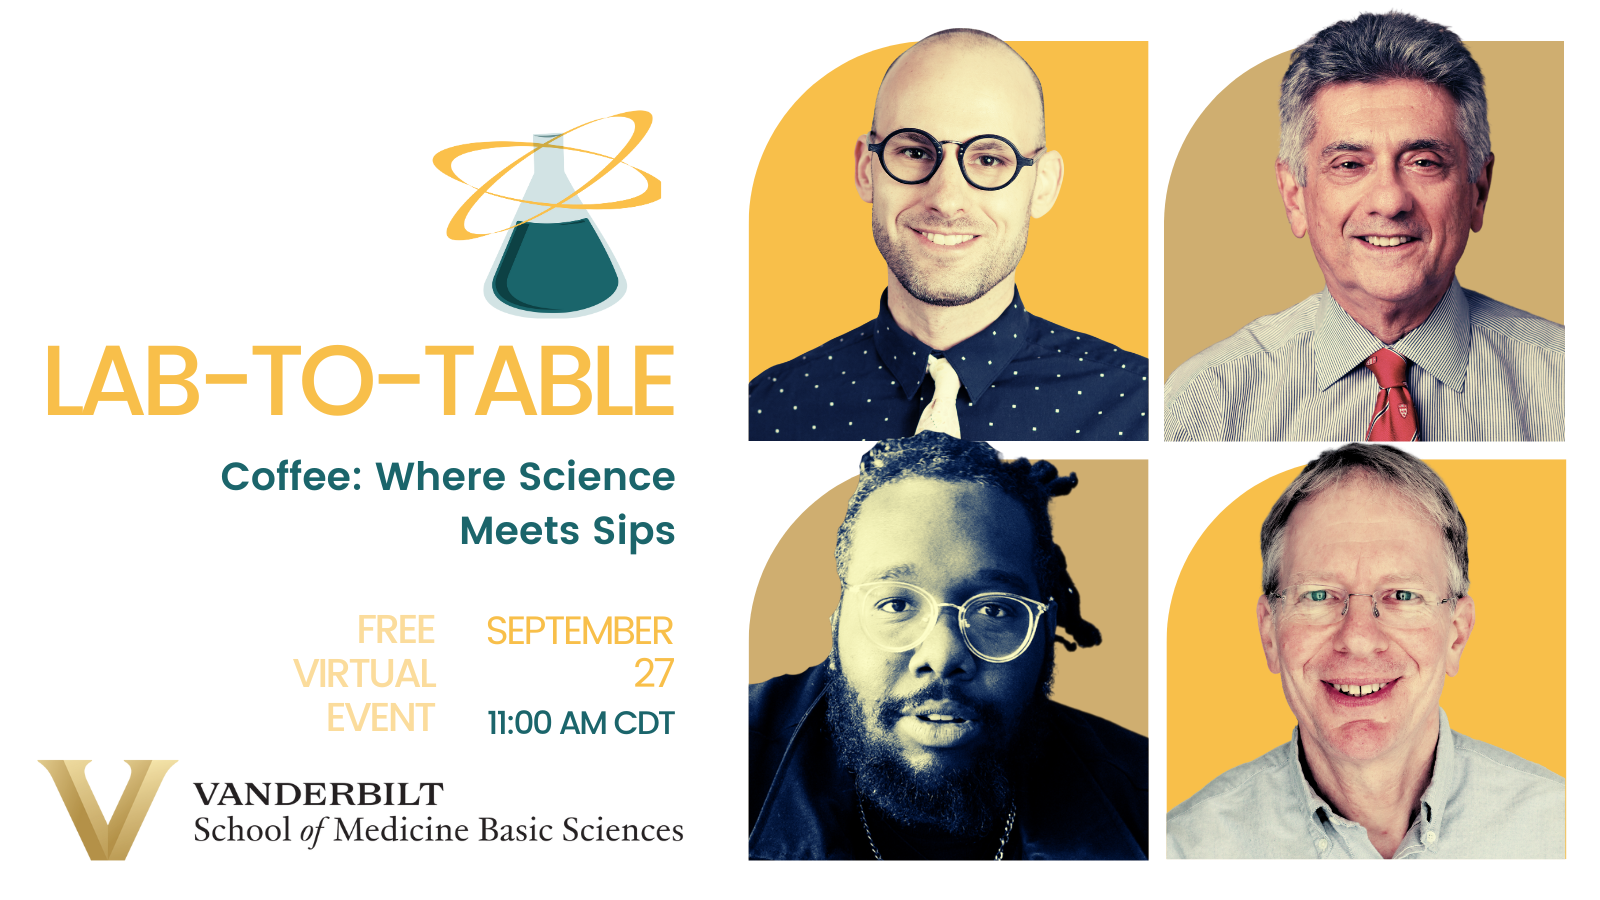 Lab-to-Table Conversation: ‘Coffee: Where Science Meets Sips’ on Sept. 27